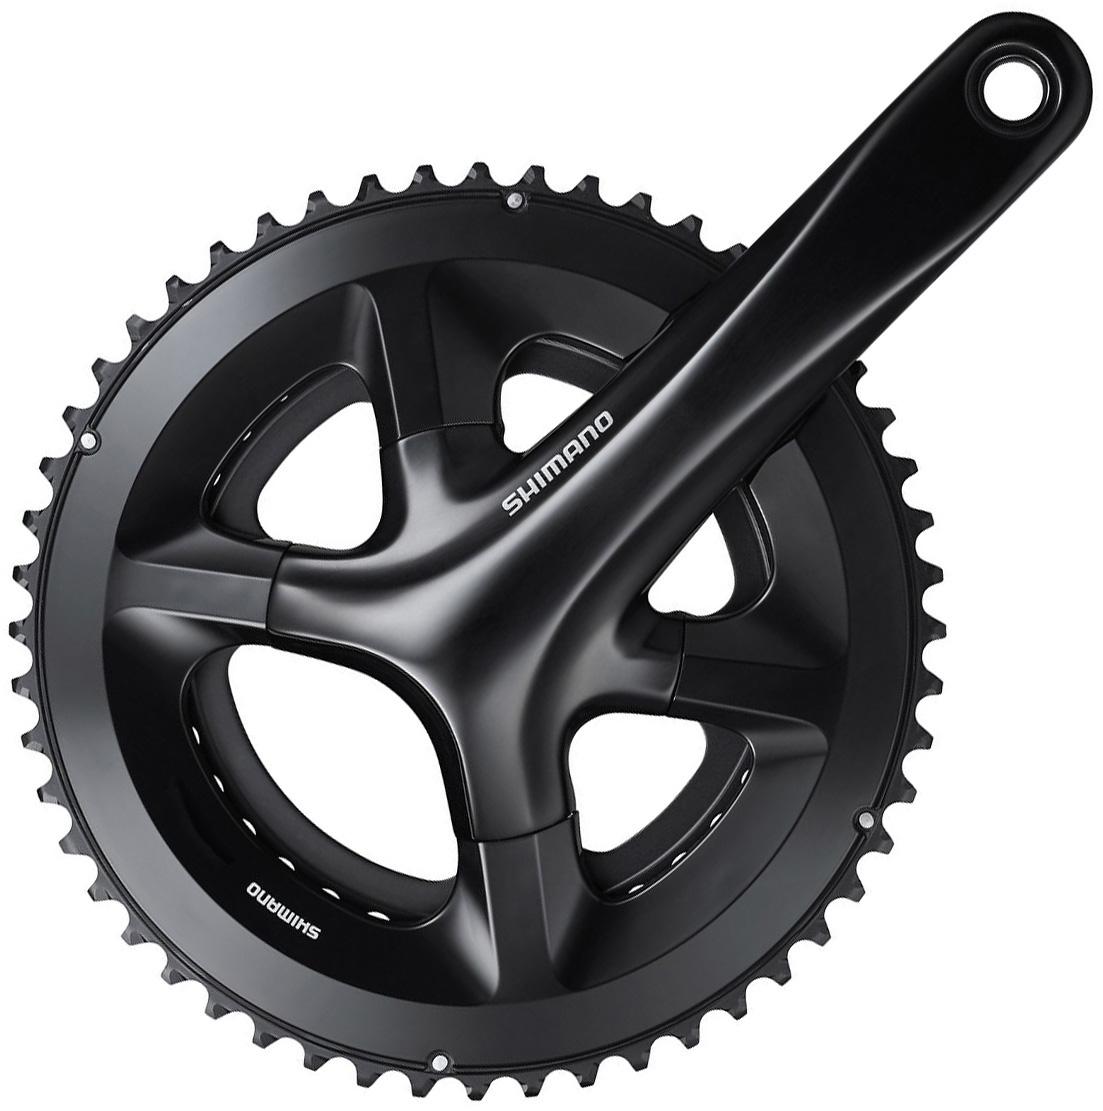 Shimano Rs520 12 Speed Double Chainset  Black